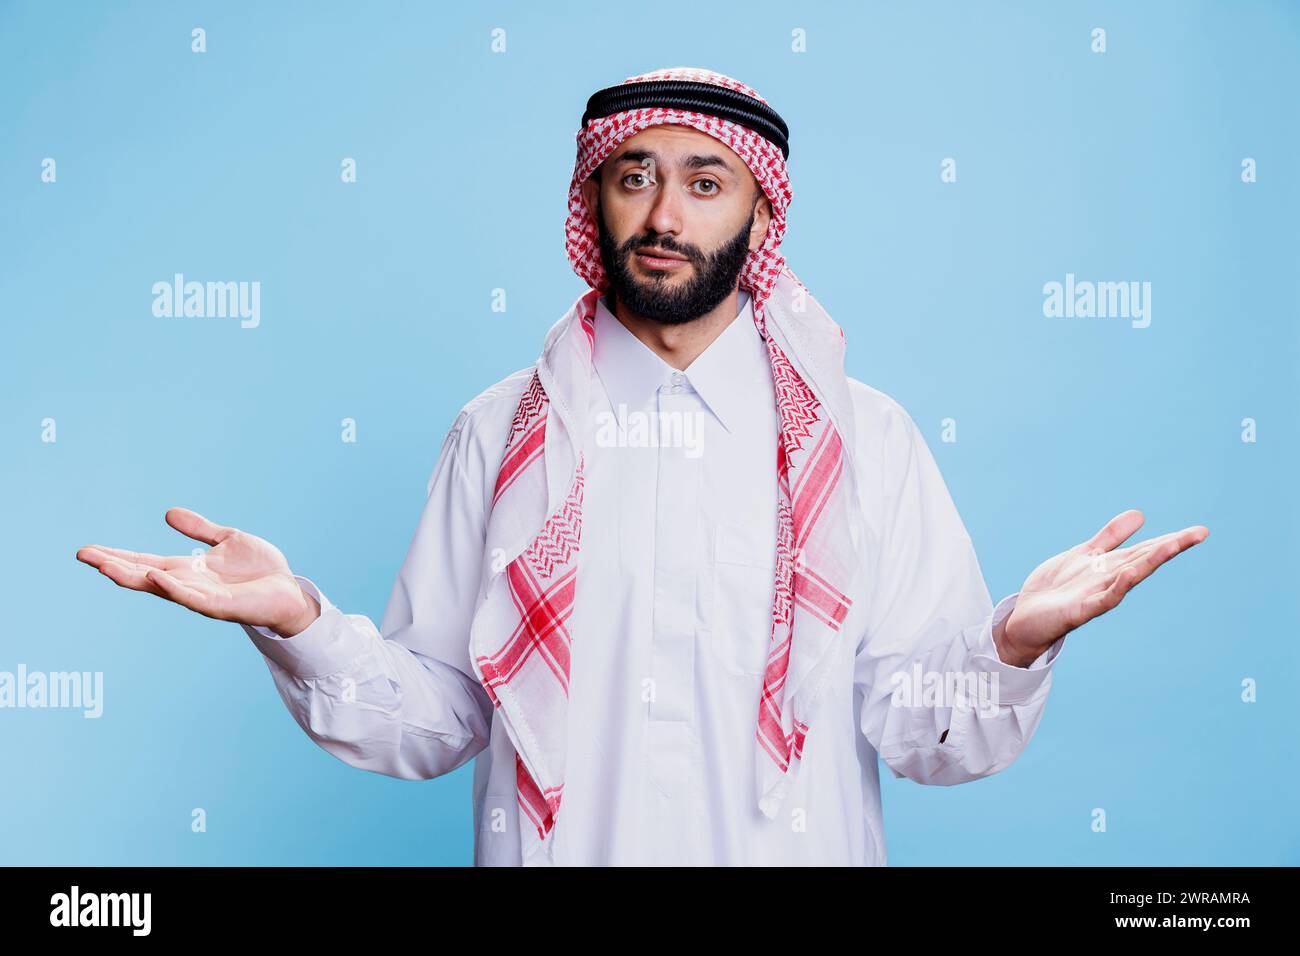 Pensive man wearing muslim thobe and headscarf, standing and shrugging shoulders while looking at camera. Arab person showing hesitation with open arms gesture studio portrait Stock Photo